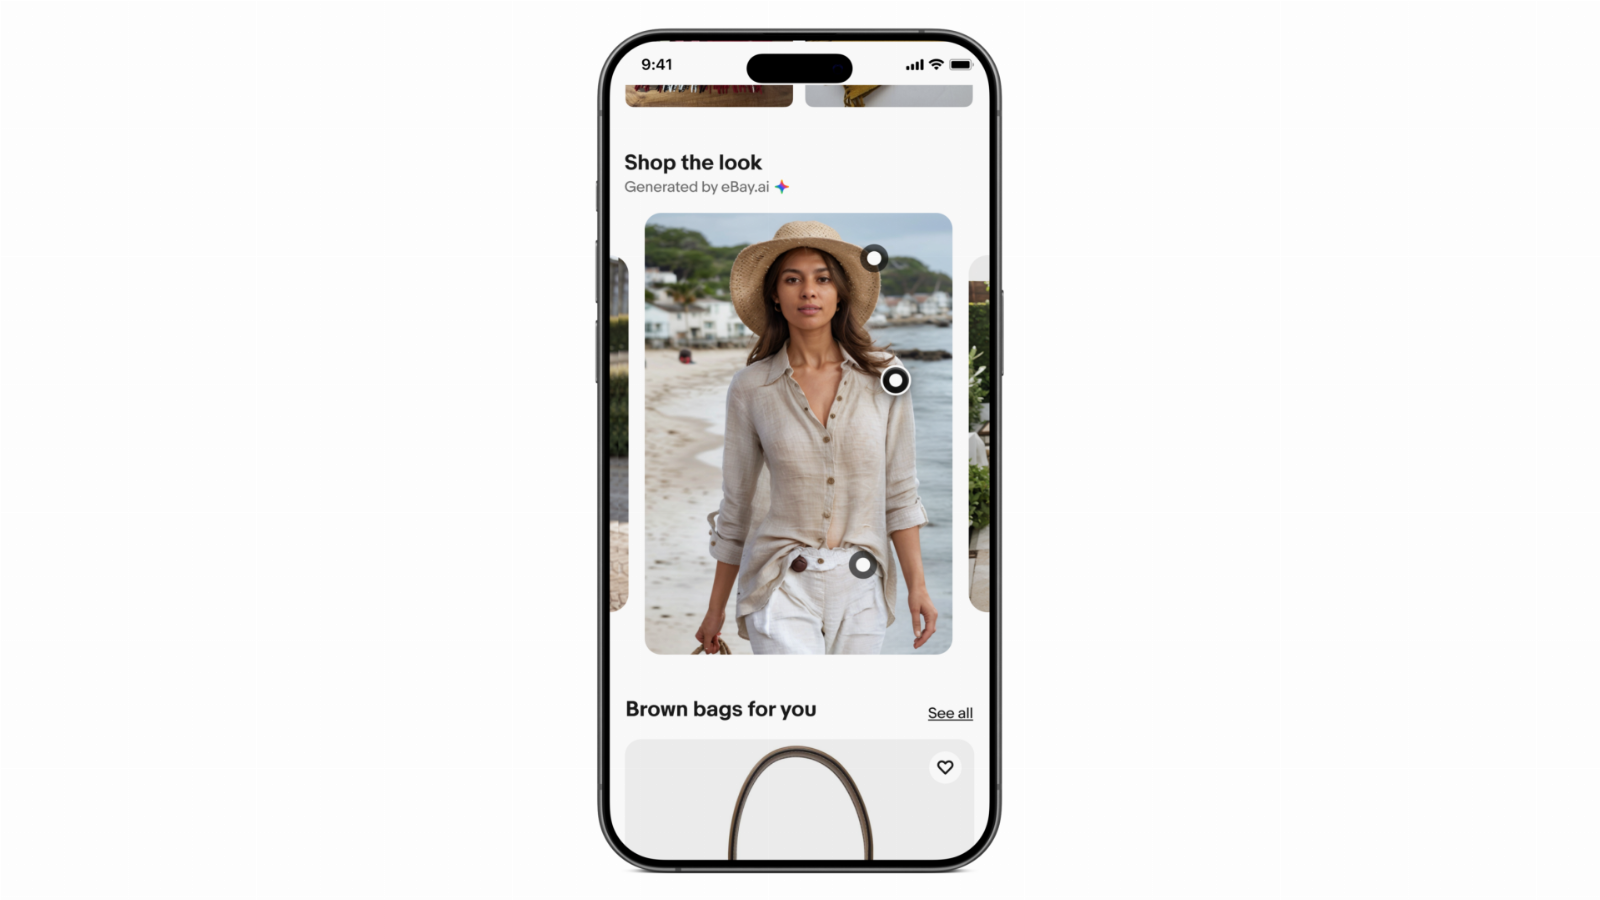 eBay adds an AI-powered ‘shop the look’ feature to its iOS app